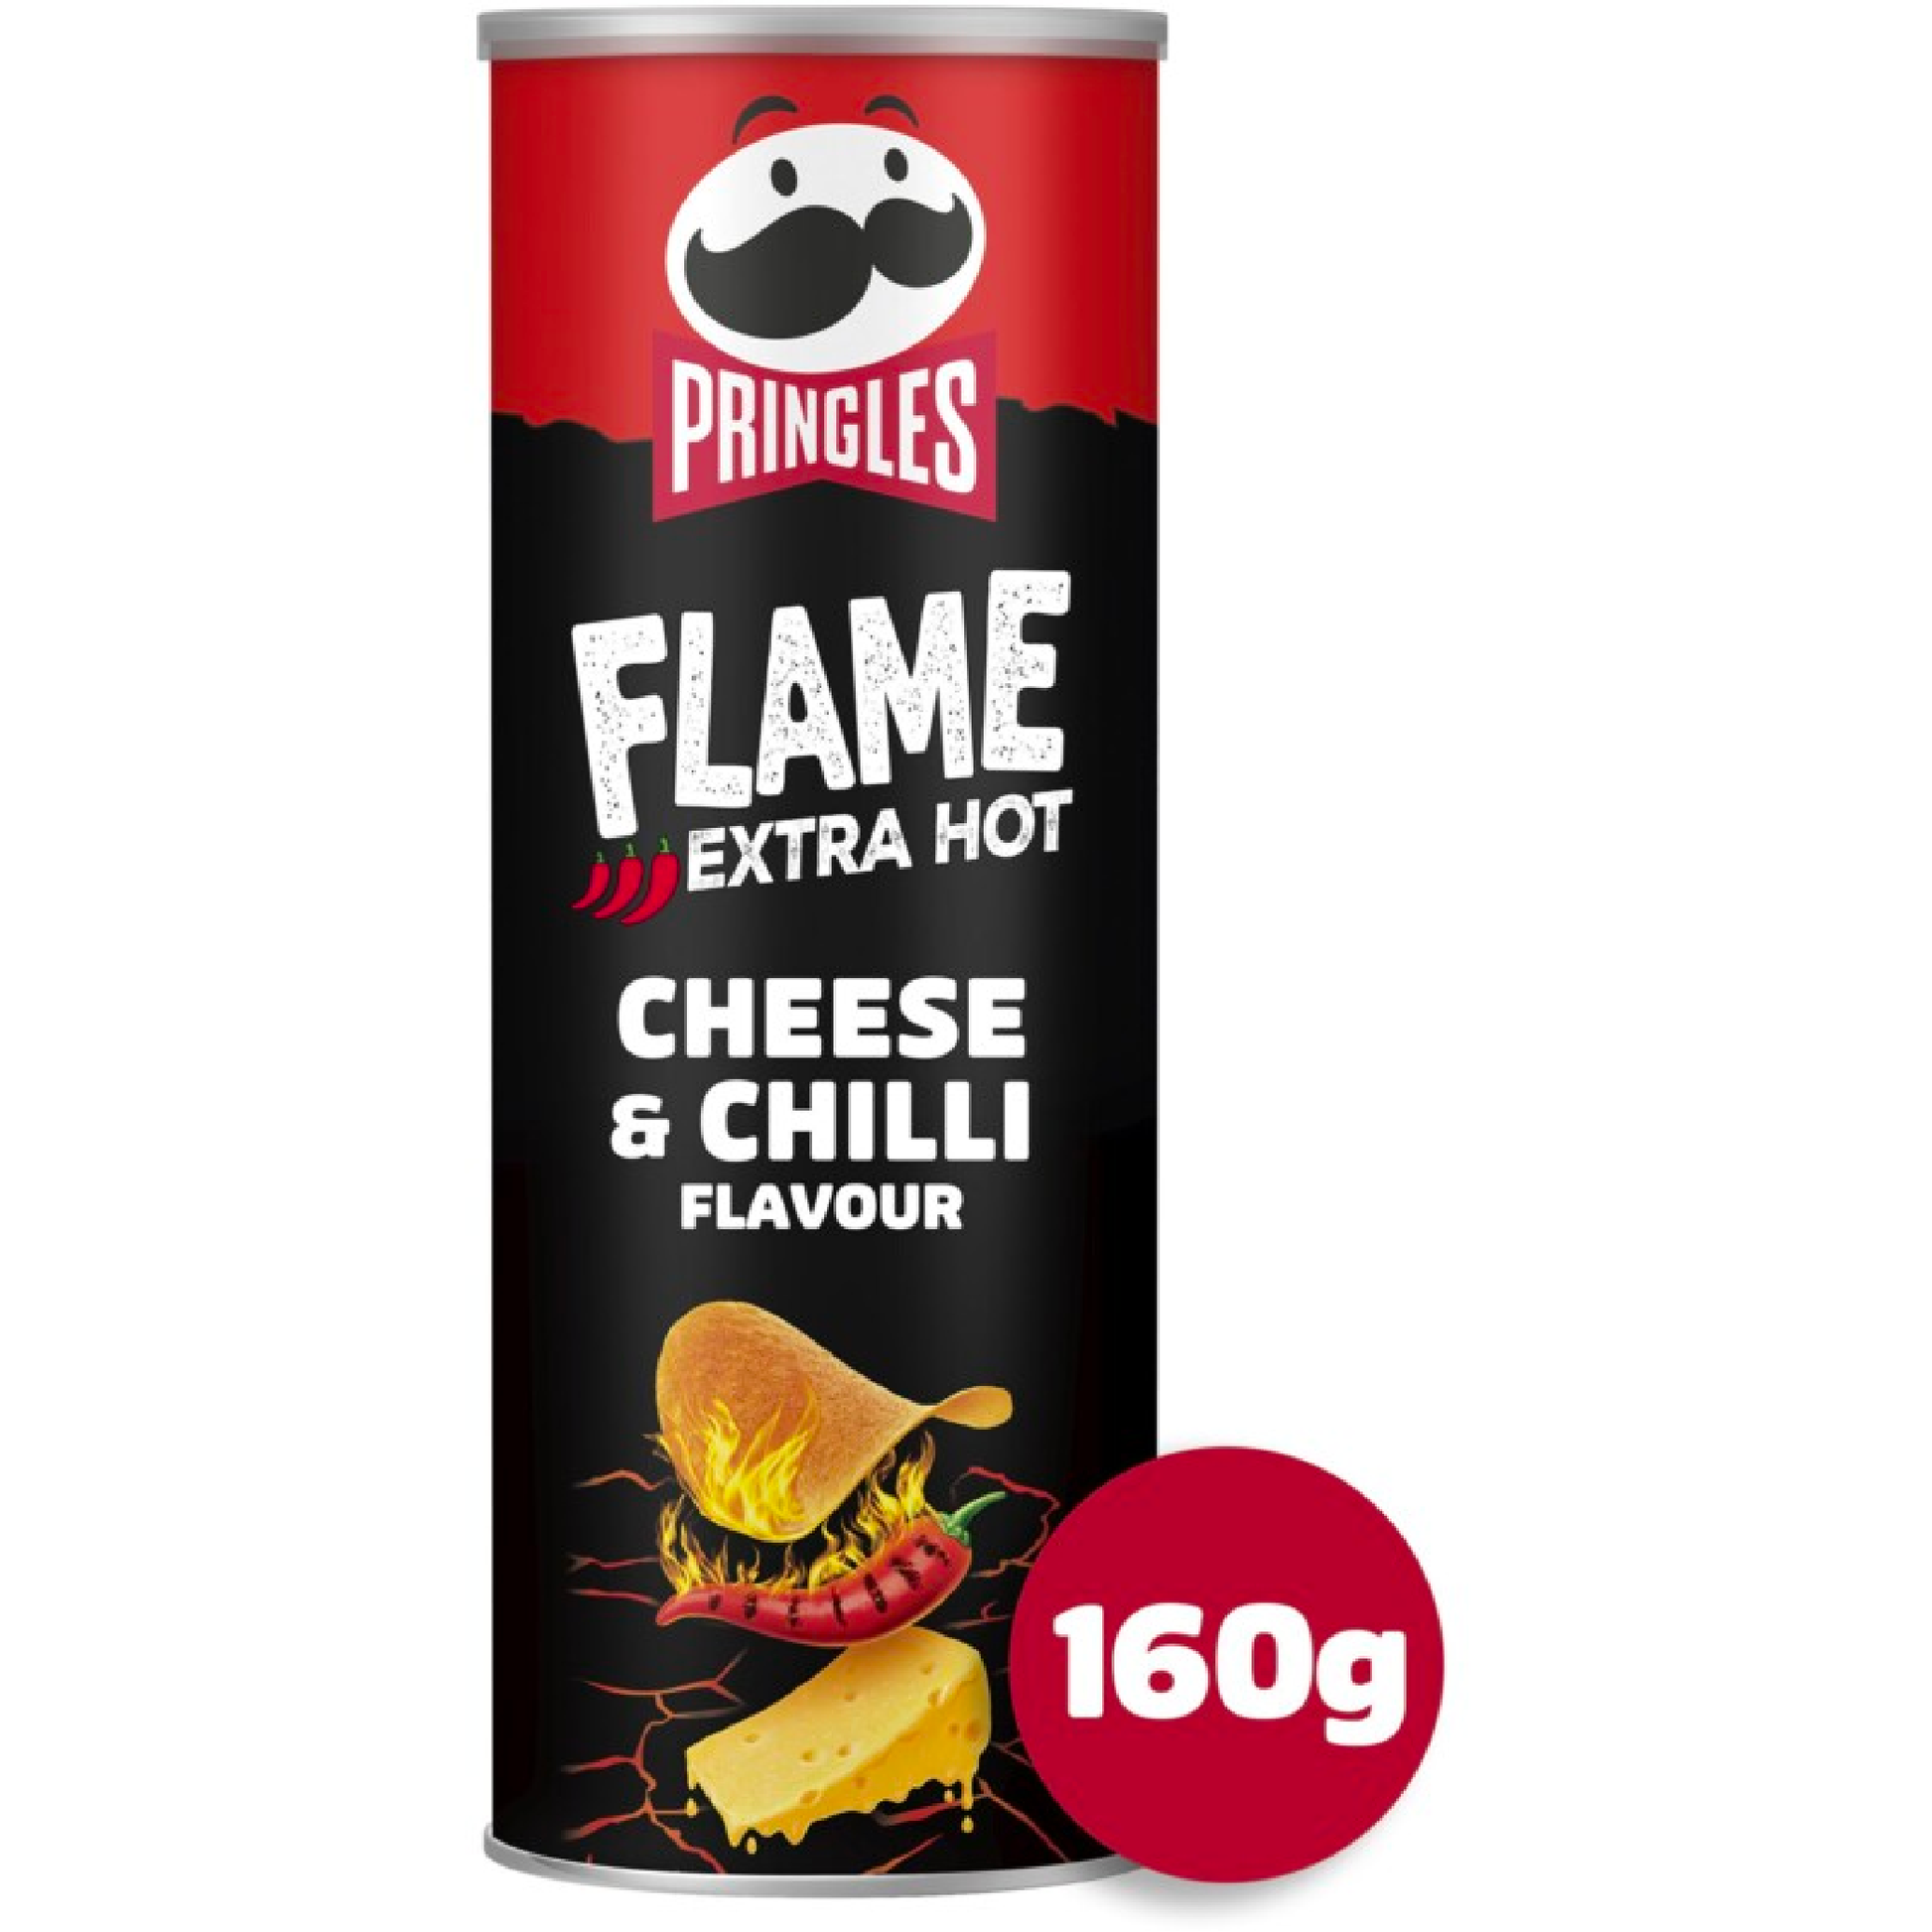 Pringles Flame Cheese Chilli 160g - Snack-It